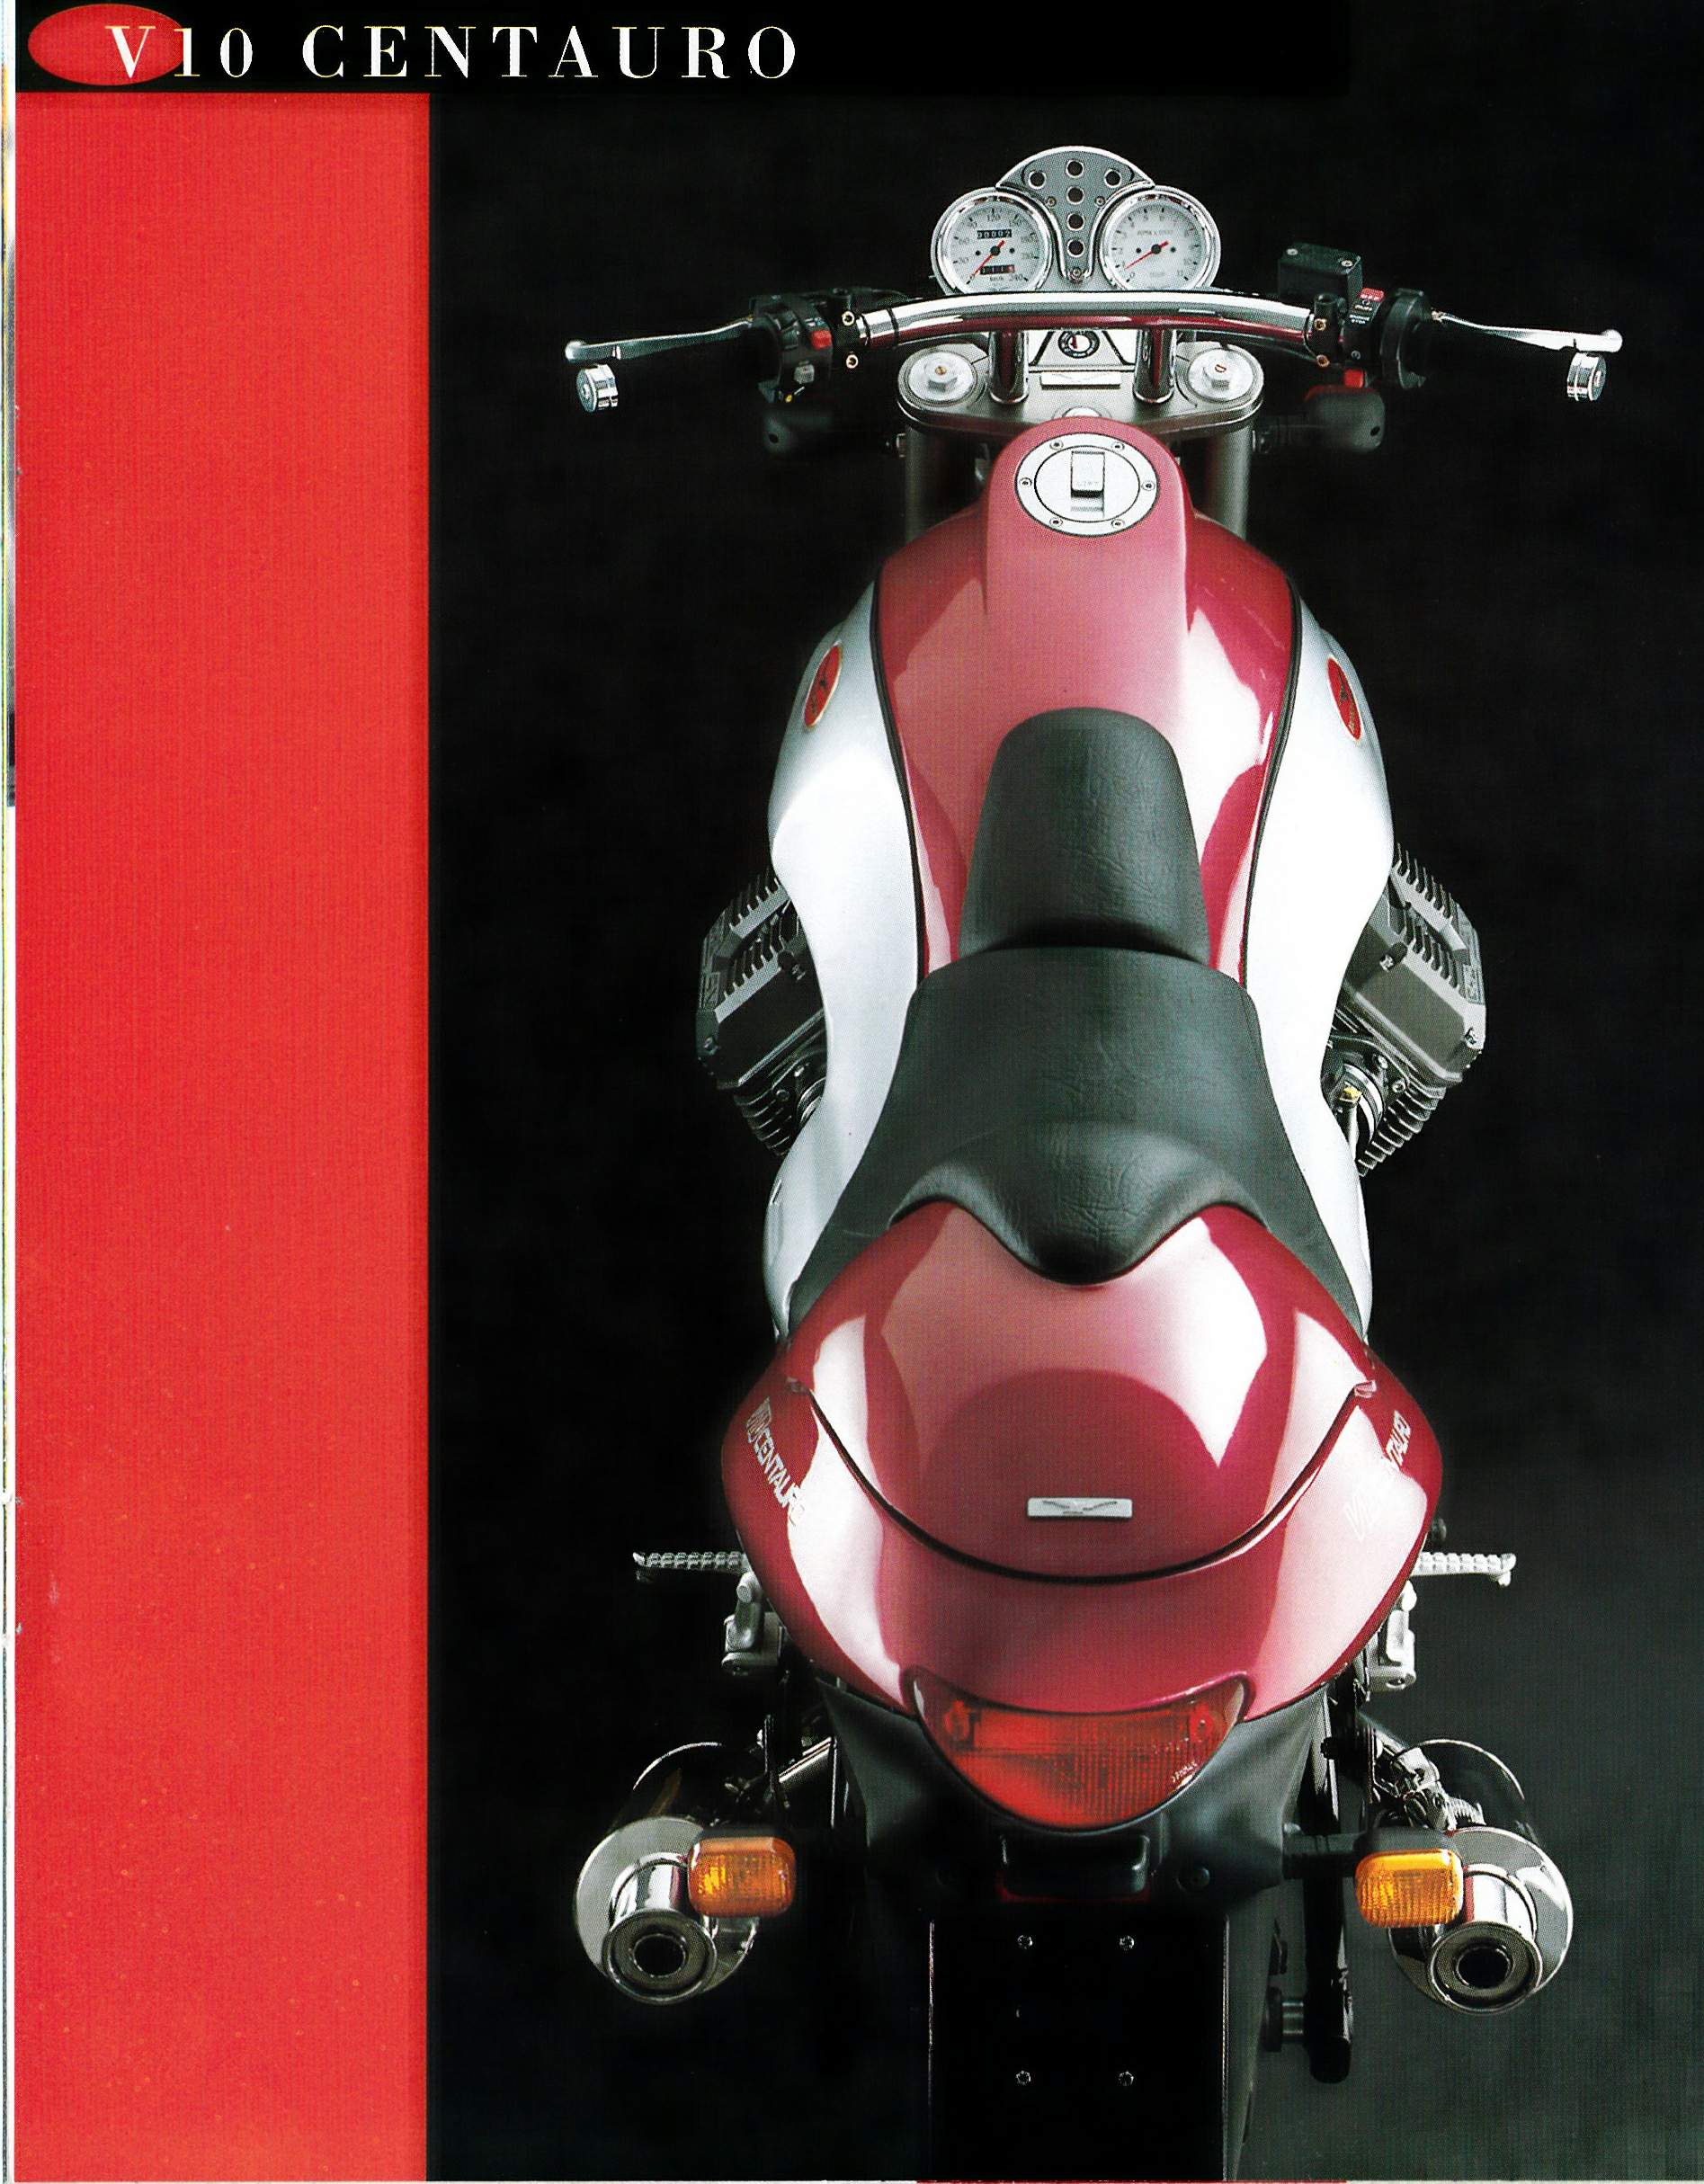 Moto Guzzi V10  Centauro For Sale Specifications, Price and Images